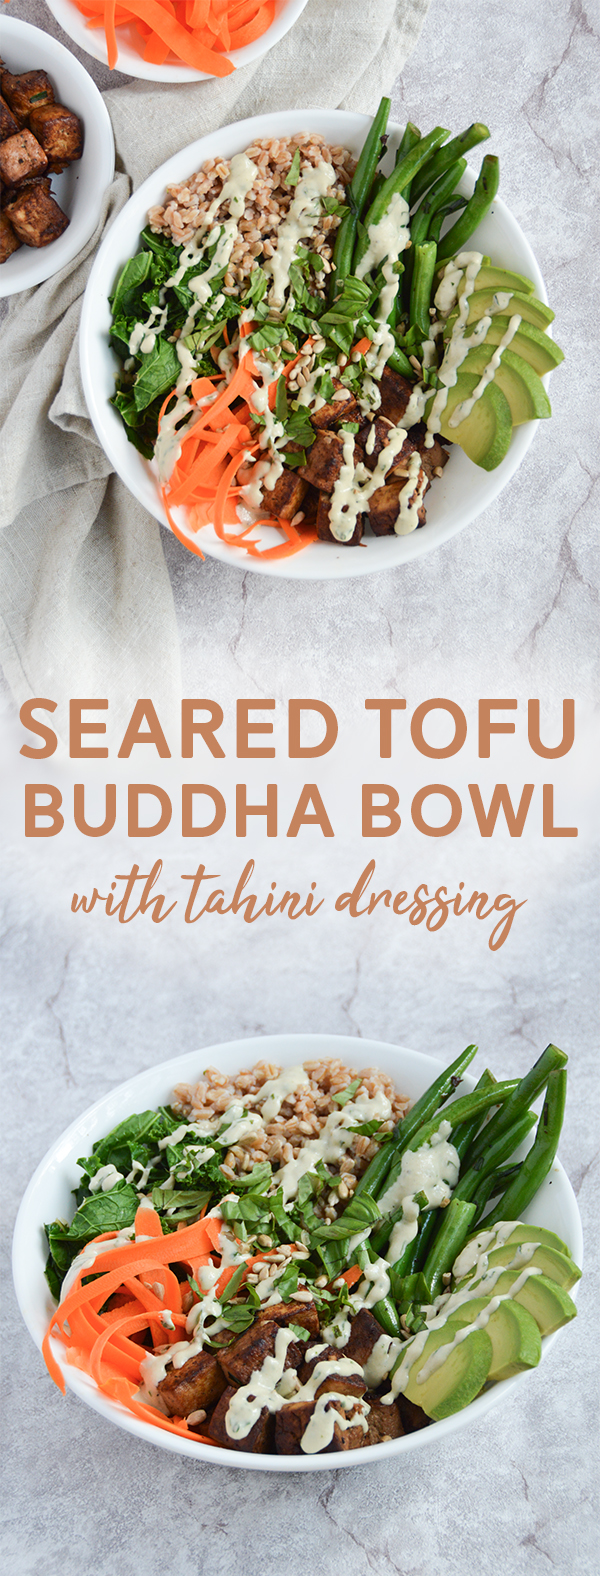 Seared Tofu Buddha Bowl with Tahini Dressing - a delicious plant-based meal! You'll want to drizzle the tahini dressing on everything! #vegan #plantbased #recipe #foodblog https://pumpsandiron.com